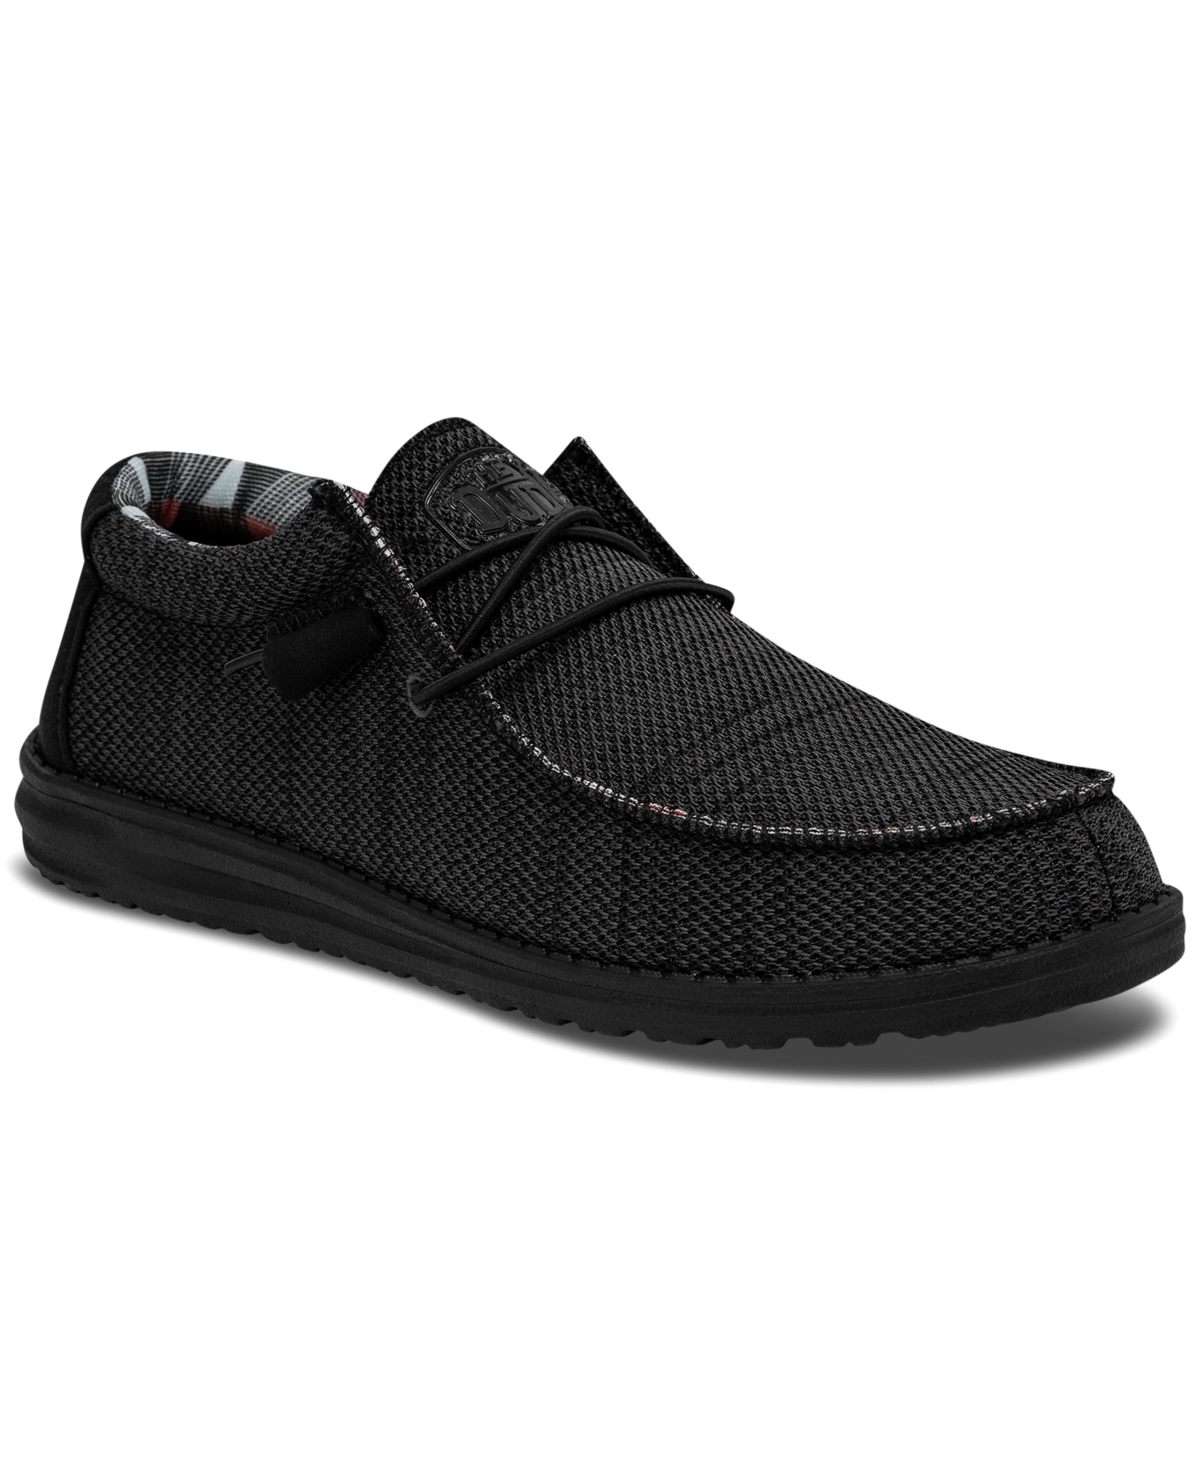 Men's Wally Sox Slip-On Casual Moccasin Sneakers from Finish Line - Micro Total Black